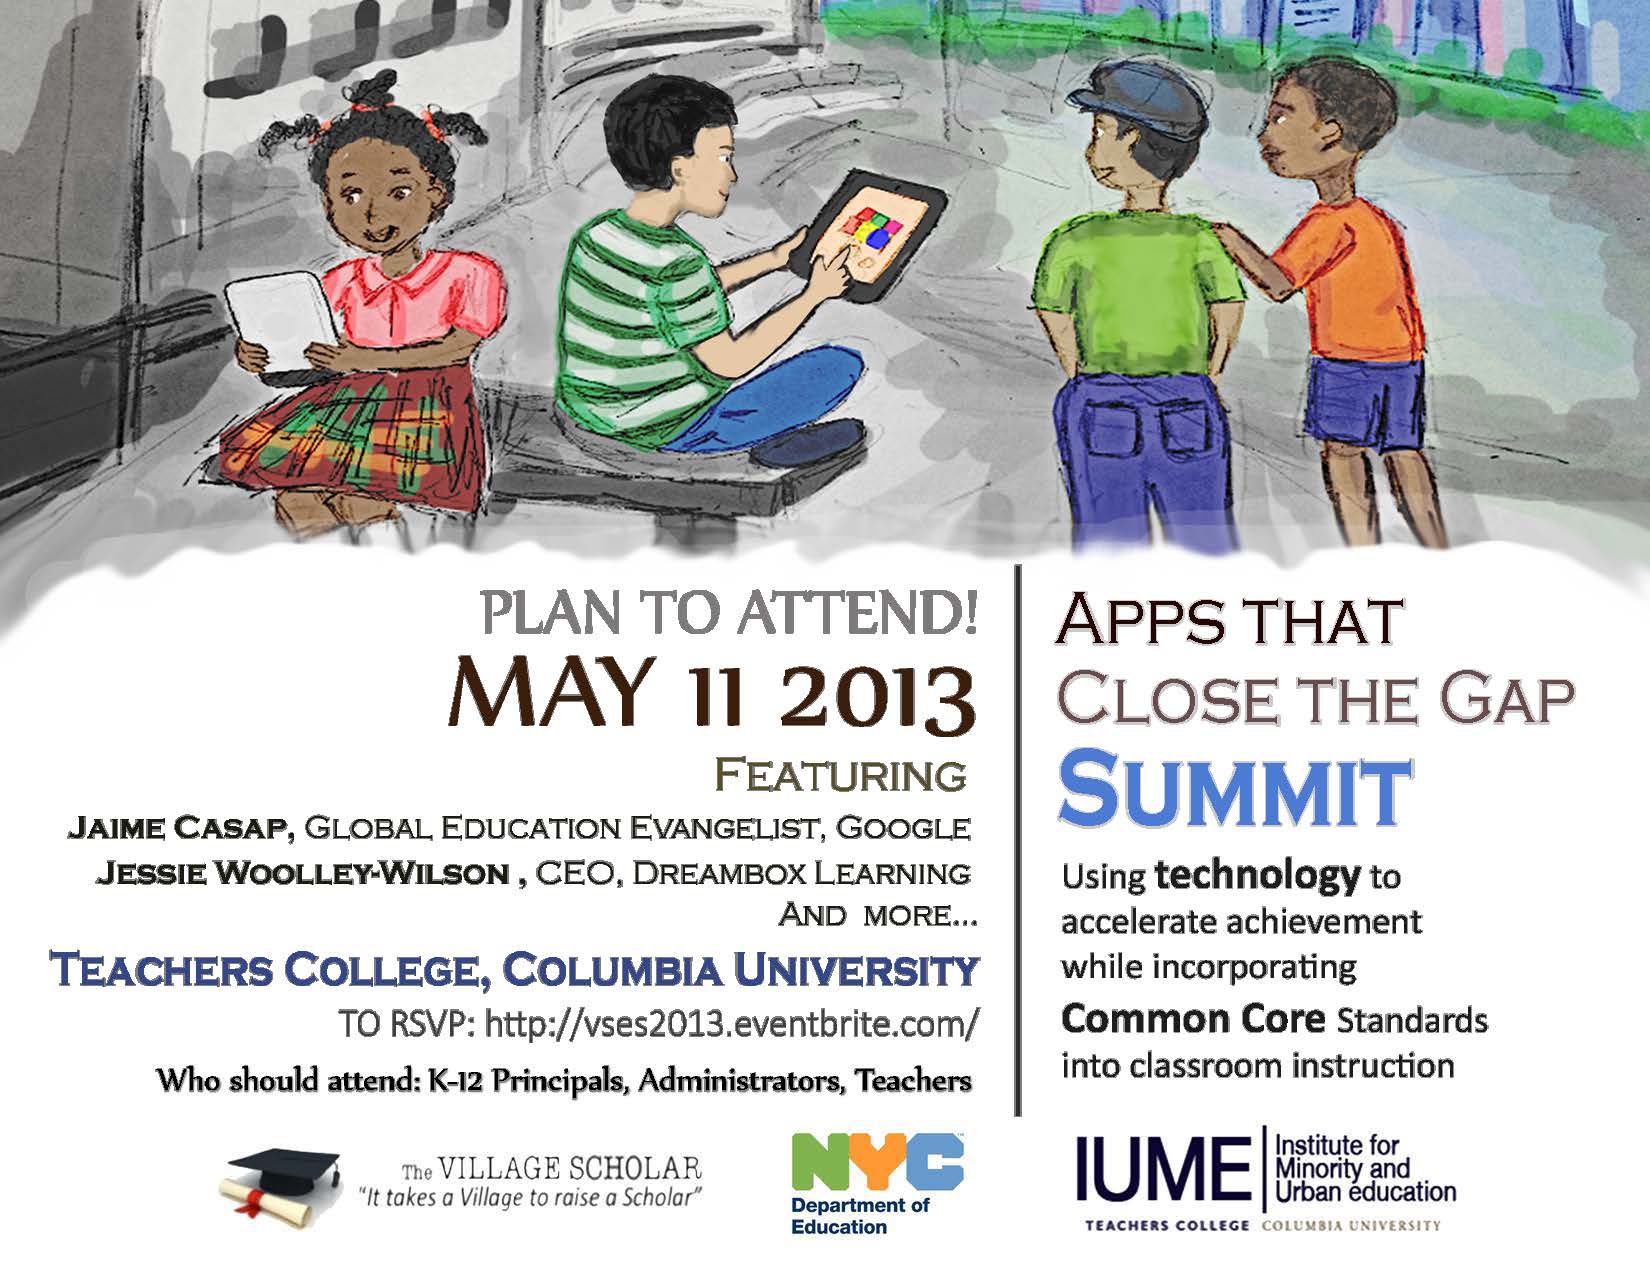 Apps that Close the Gap Summit